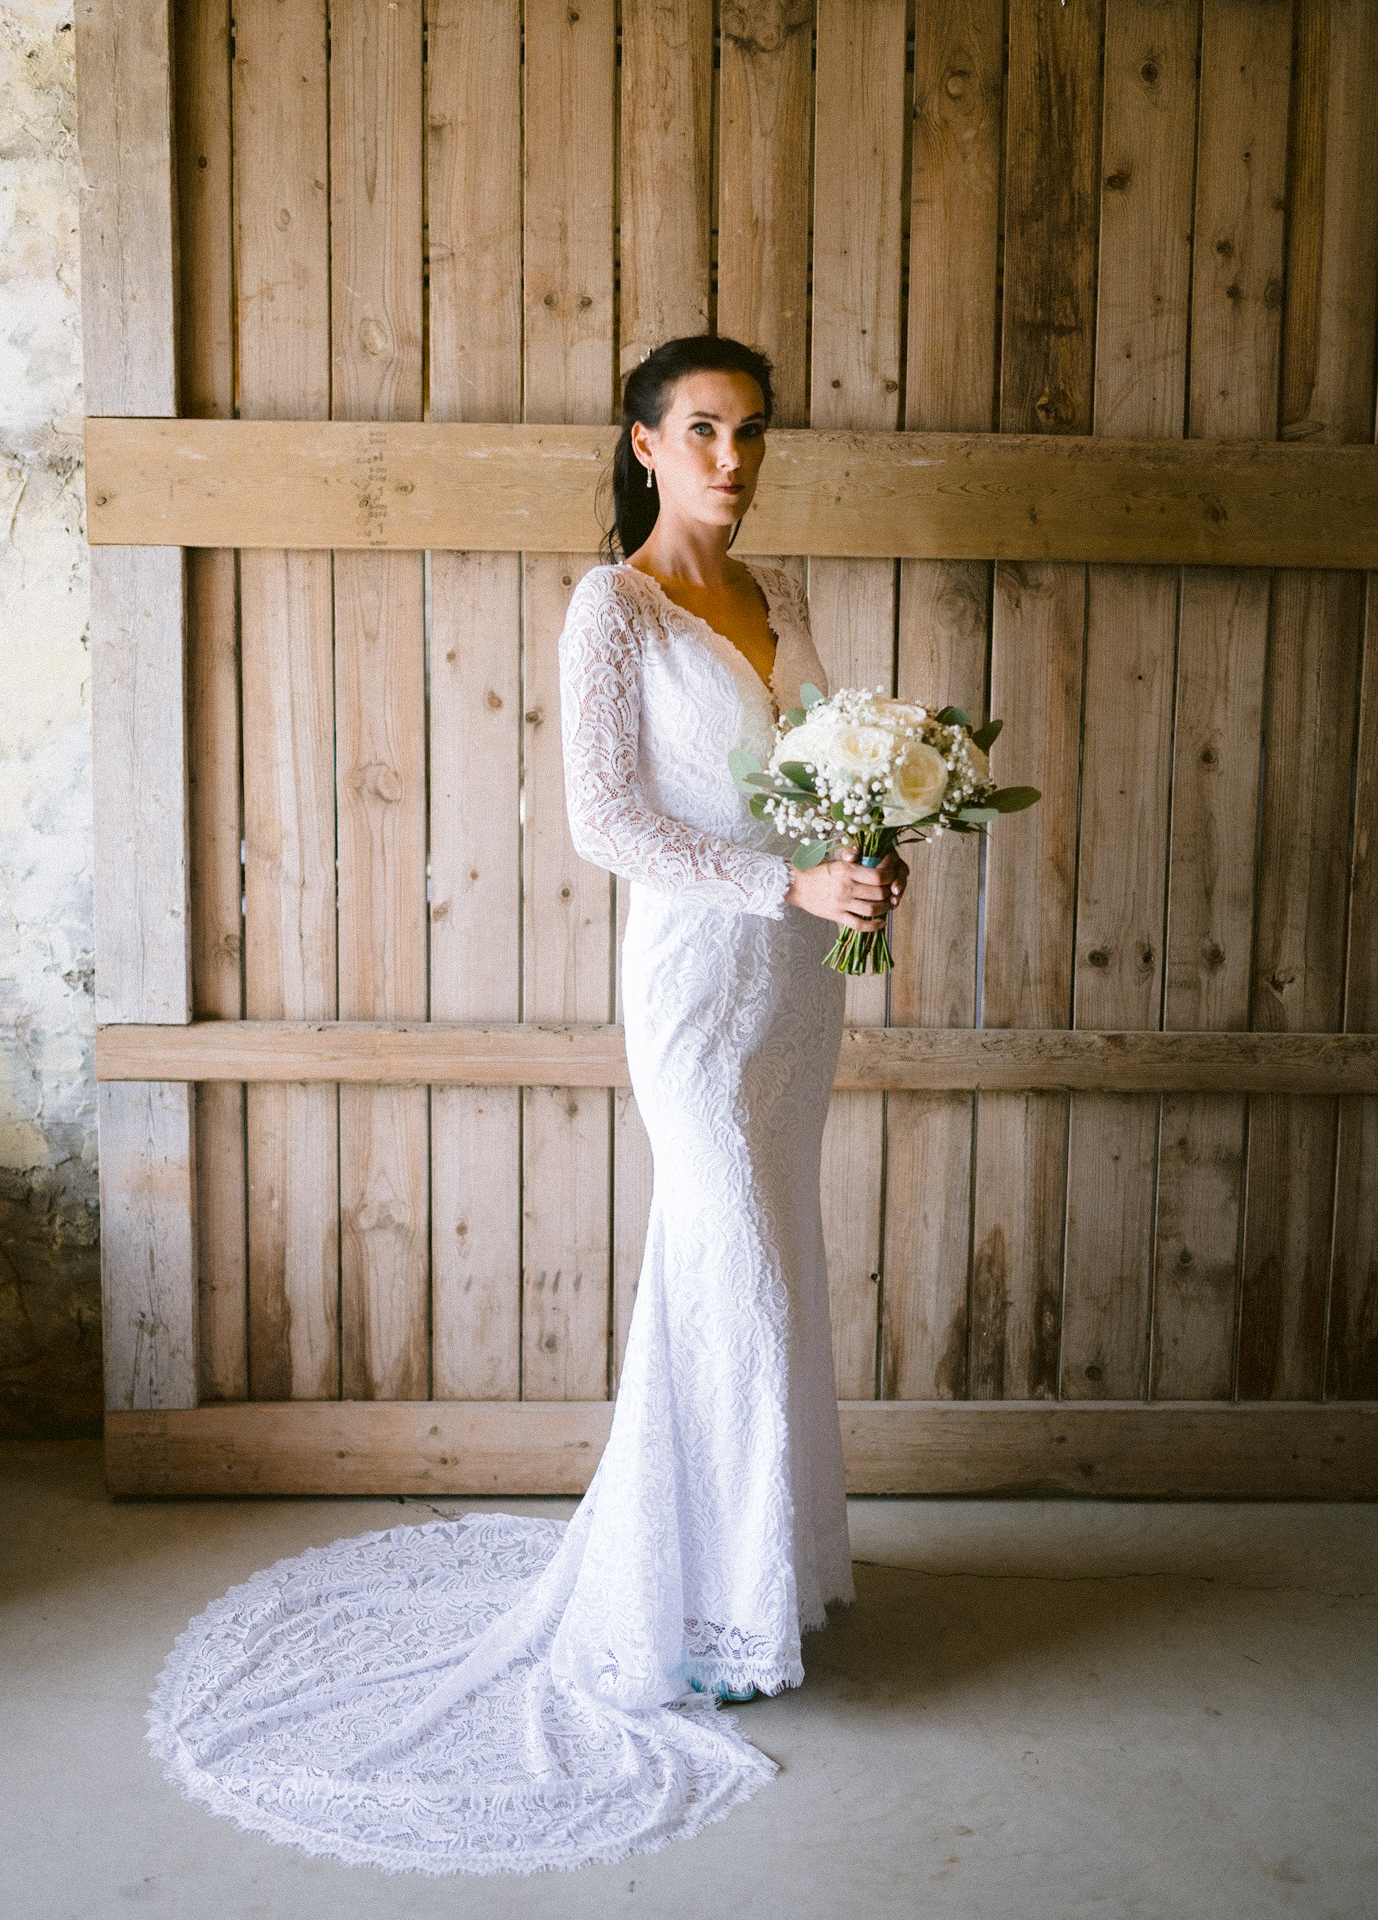 A bride in a lace wedding gown holding a bouquet.